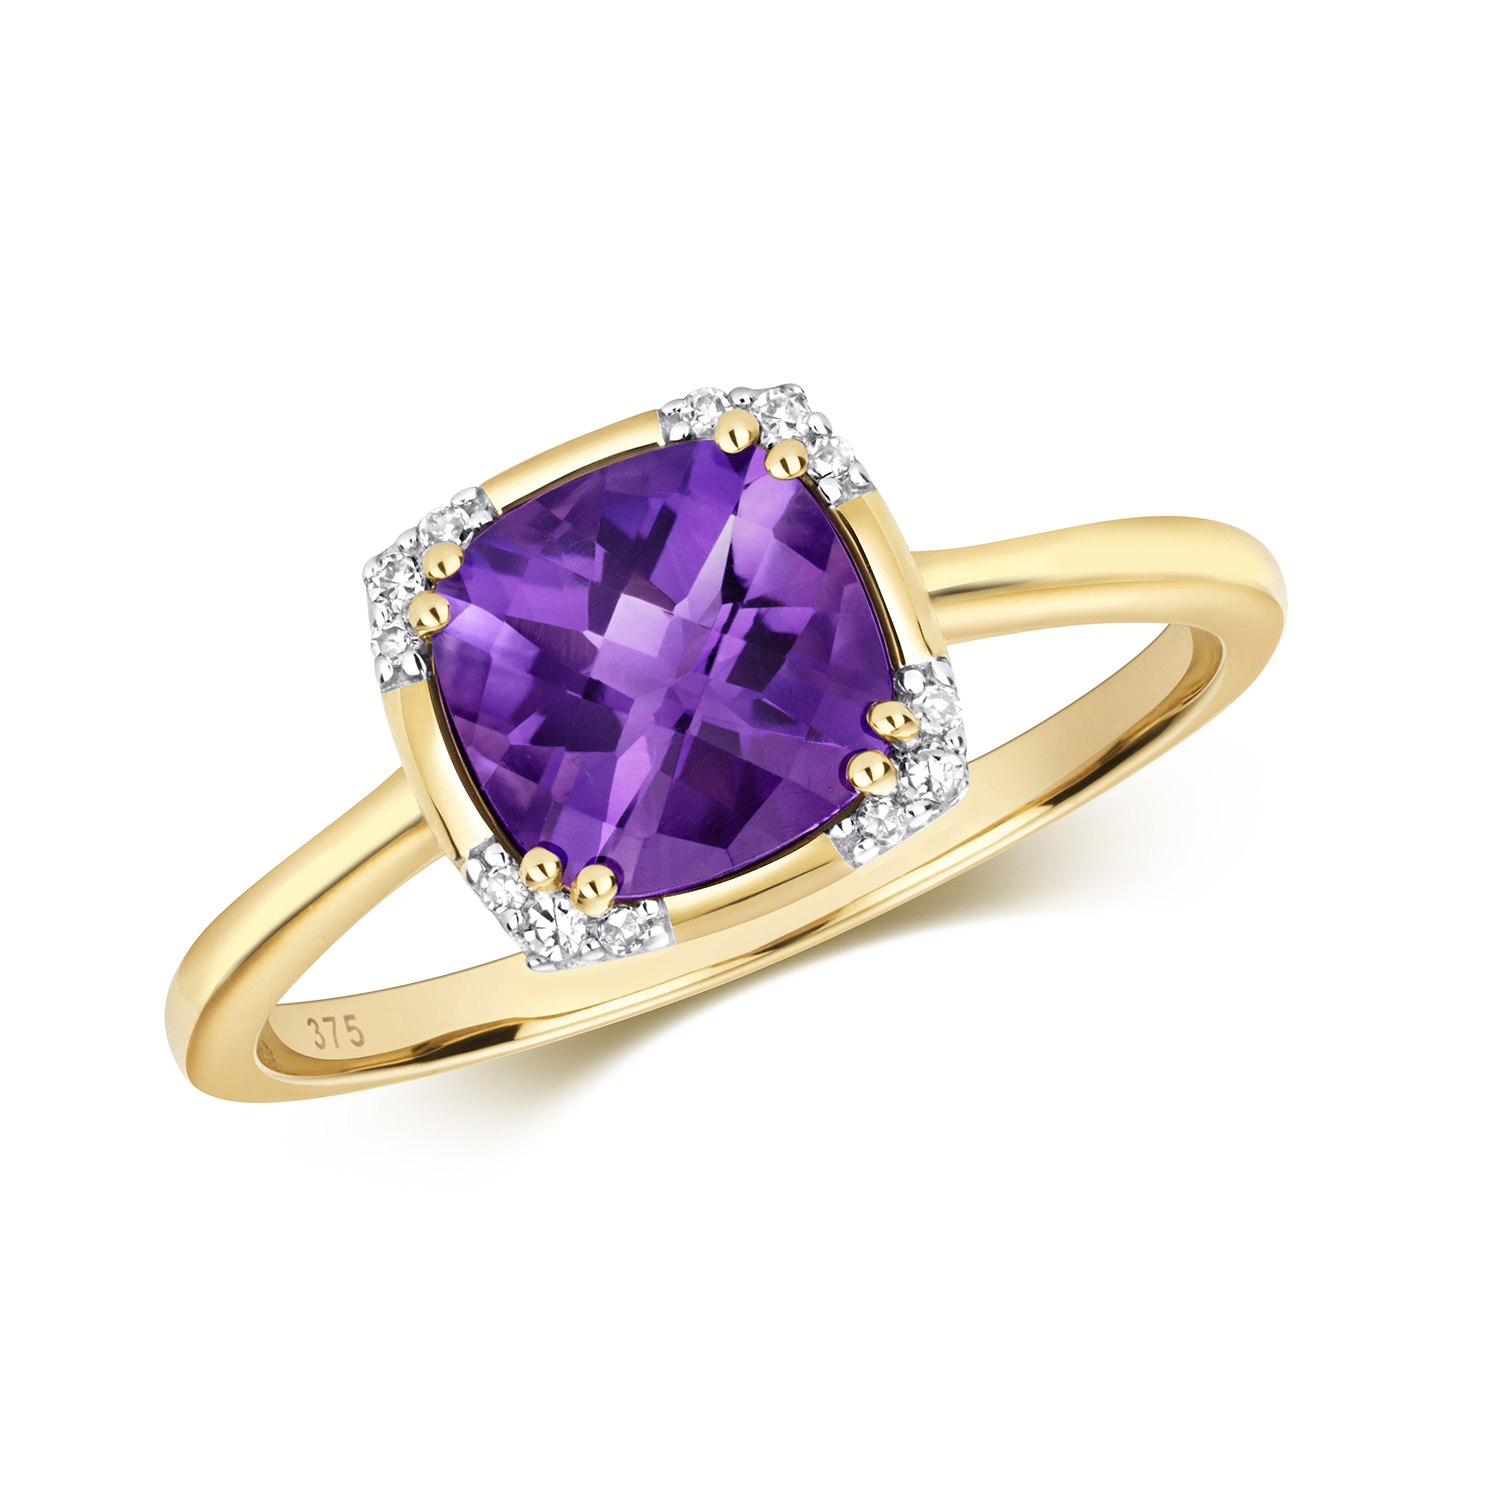 Everything You Need To Know About Birthstone - abelini.com